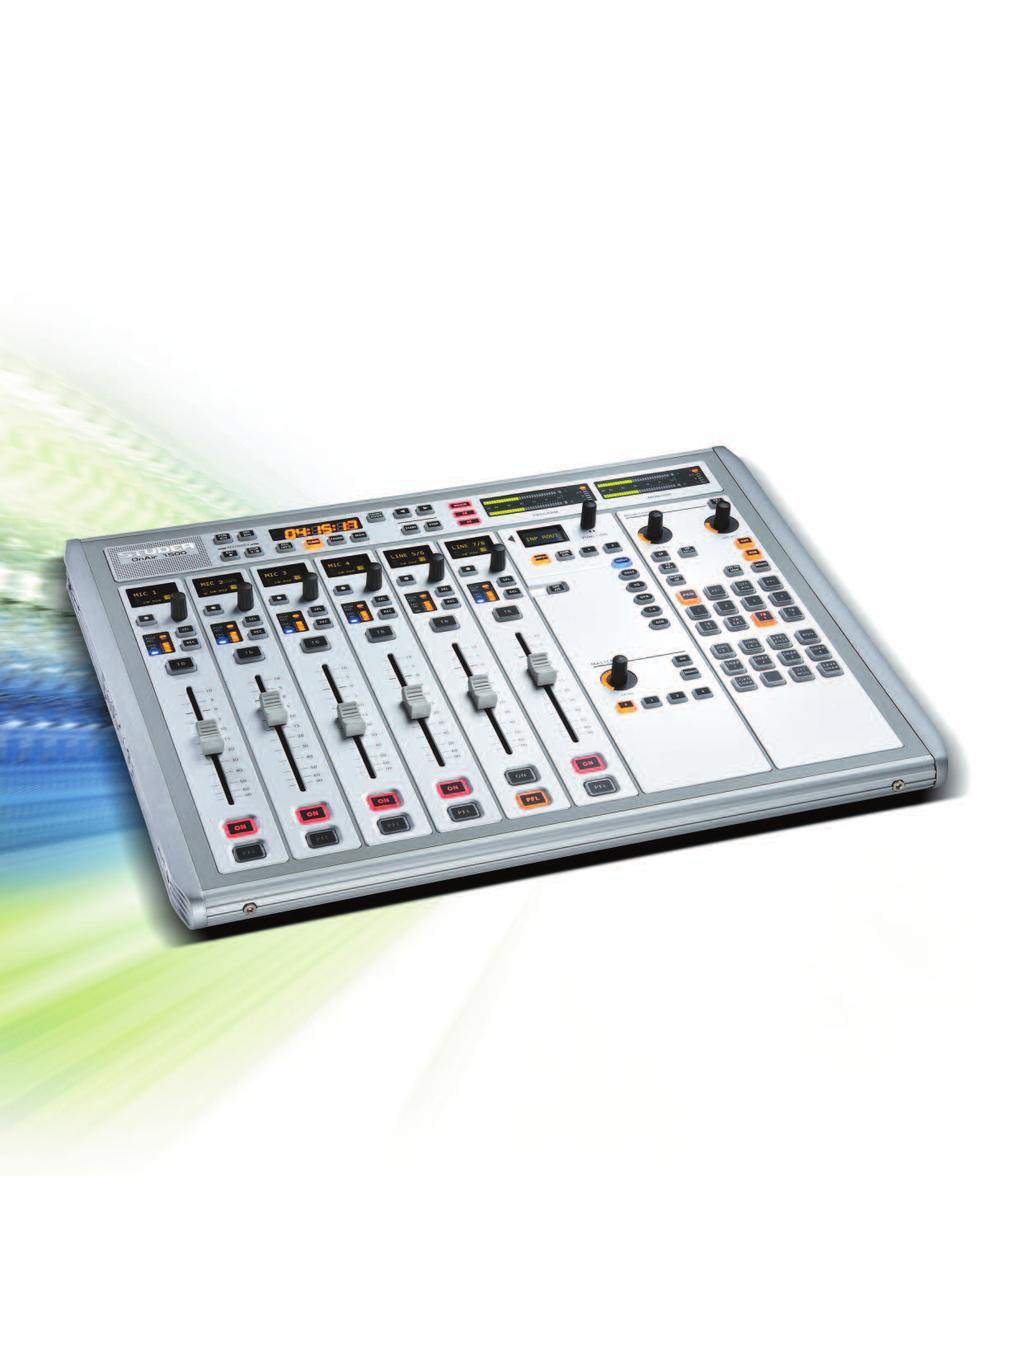 A lot more broadcasting For a lot less money The OnAir 1500 has been designed as a flexible console for on-air and production broadcasting applications.